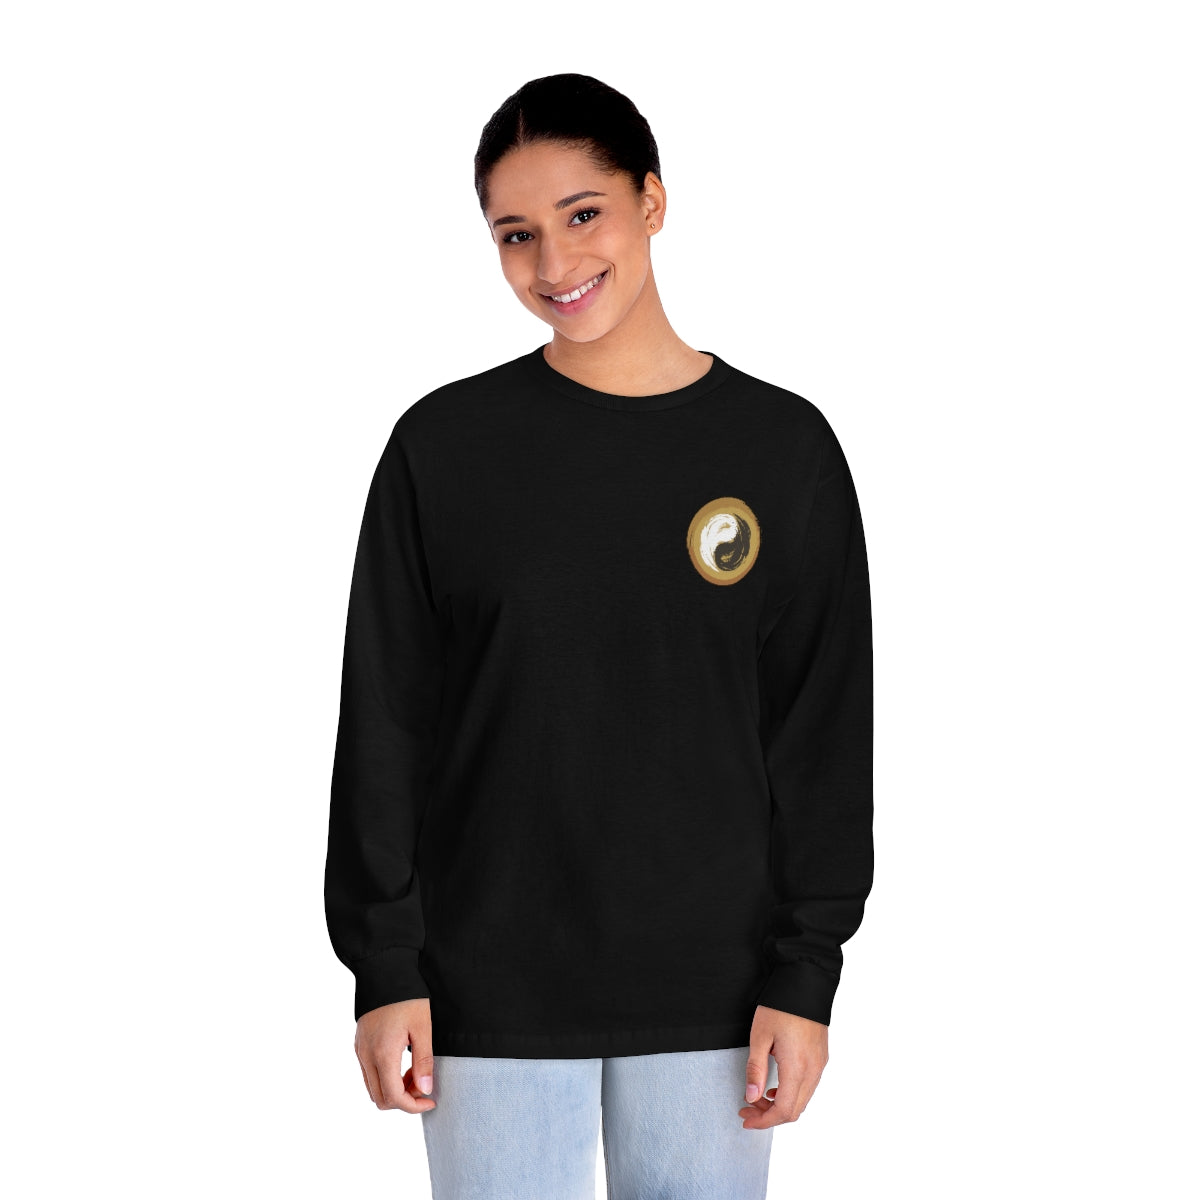 Unisex Classic Long Sleeve T-Shirt - Personal Hour for Yoga and Meditations 